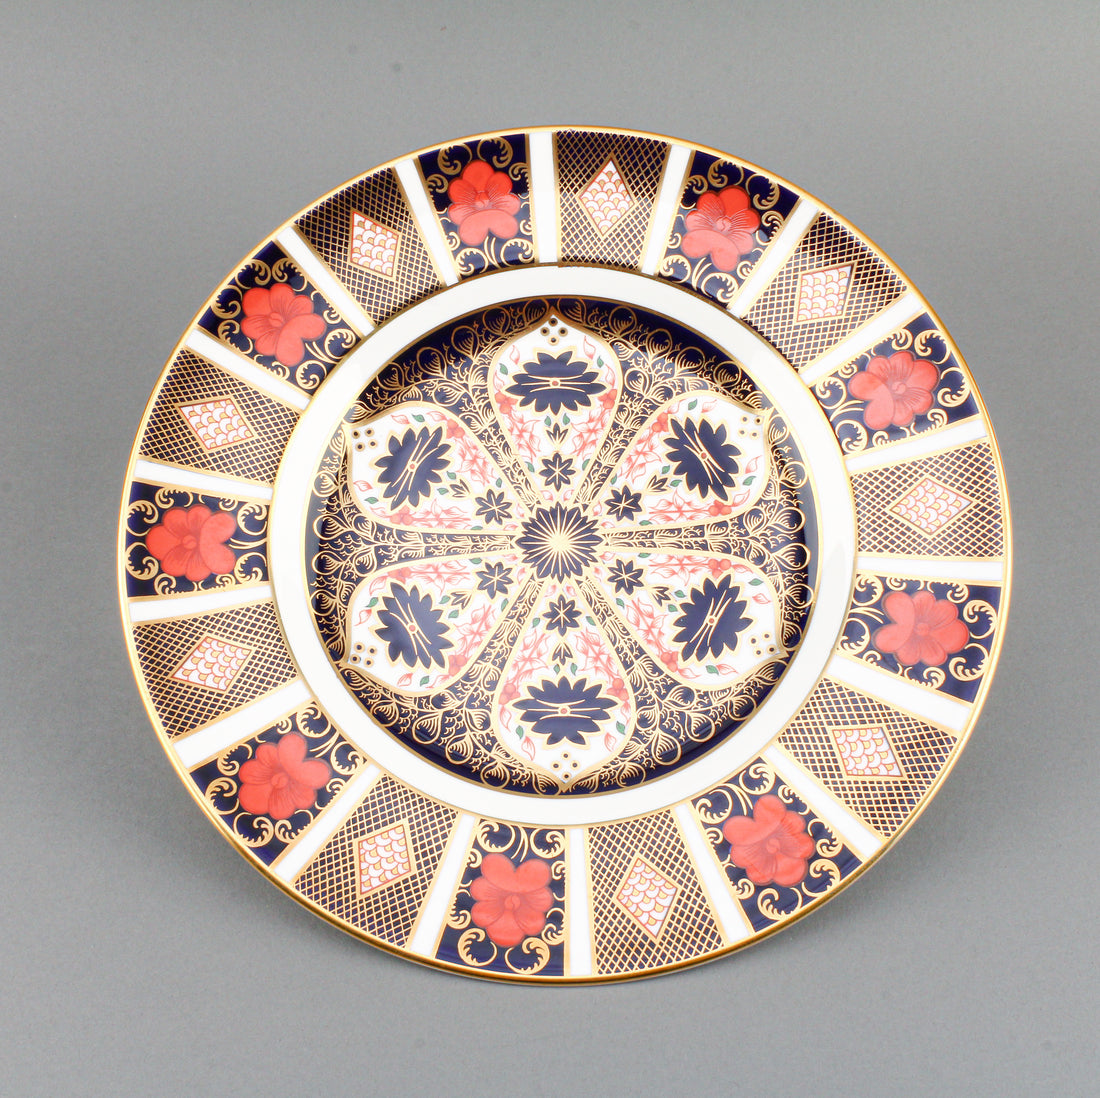 ROYAL CROWN DERBY Old Imari 1128 - 10 Place Settings